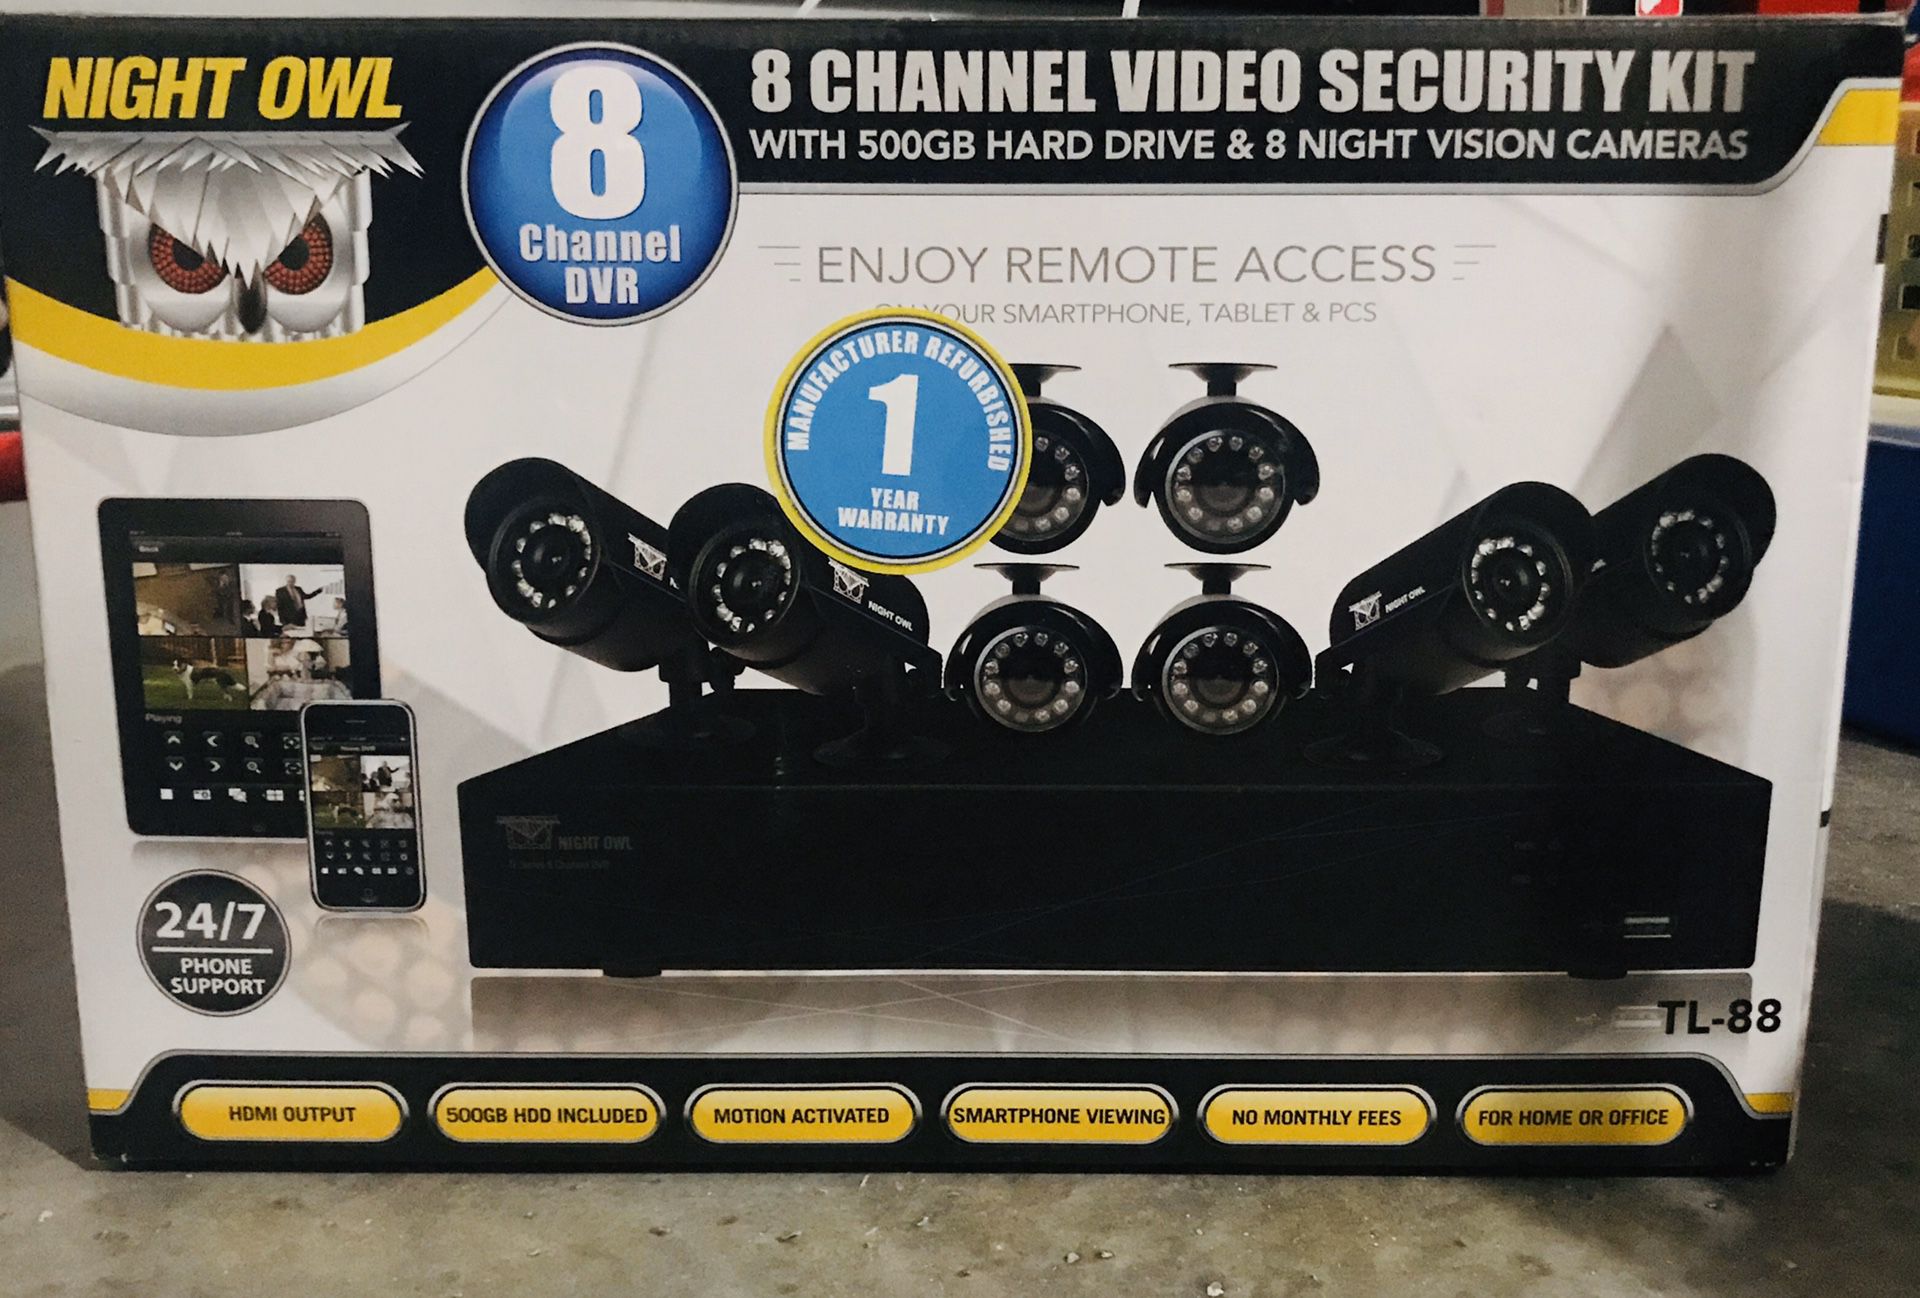 Night owl 8 channel security system night vision cameras